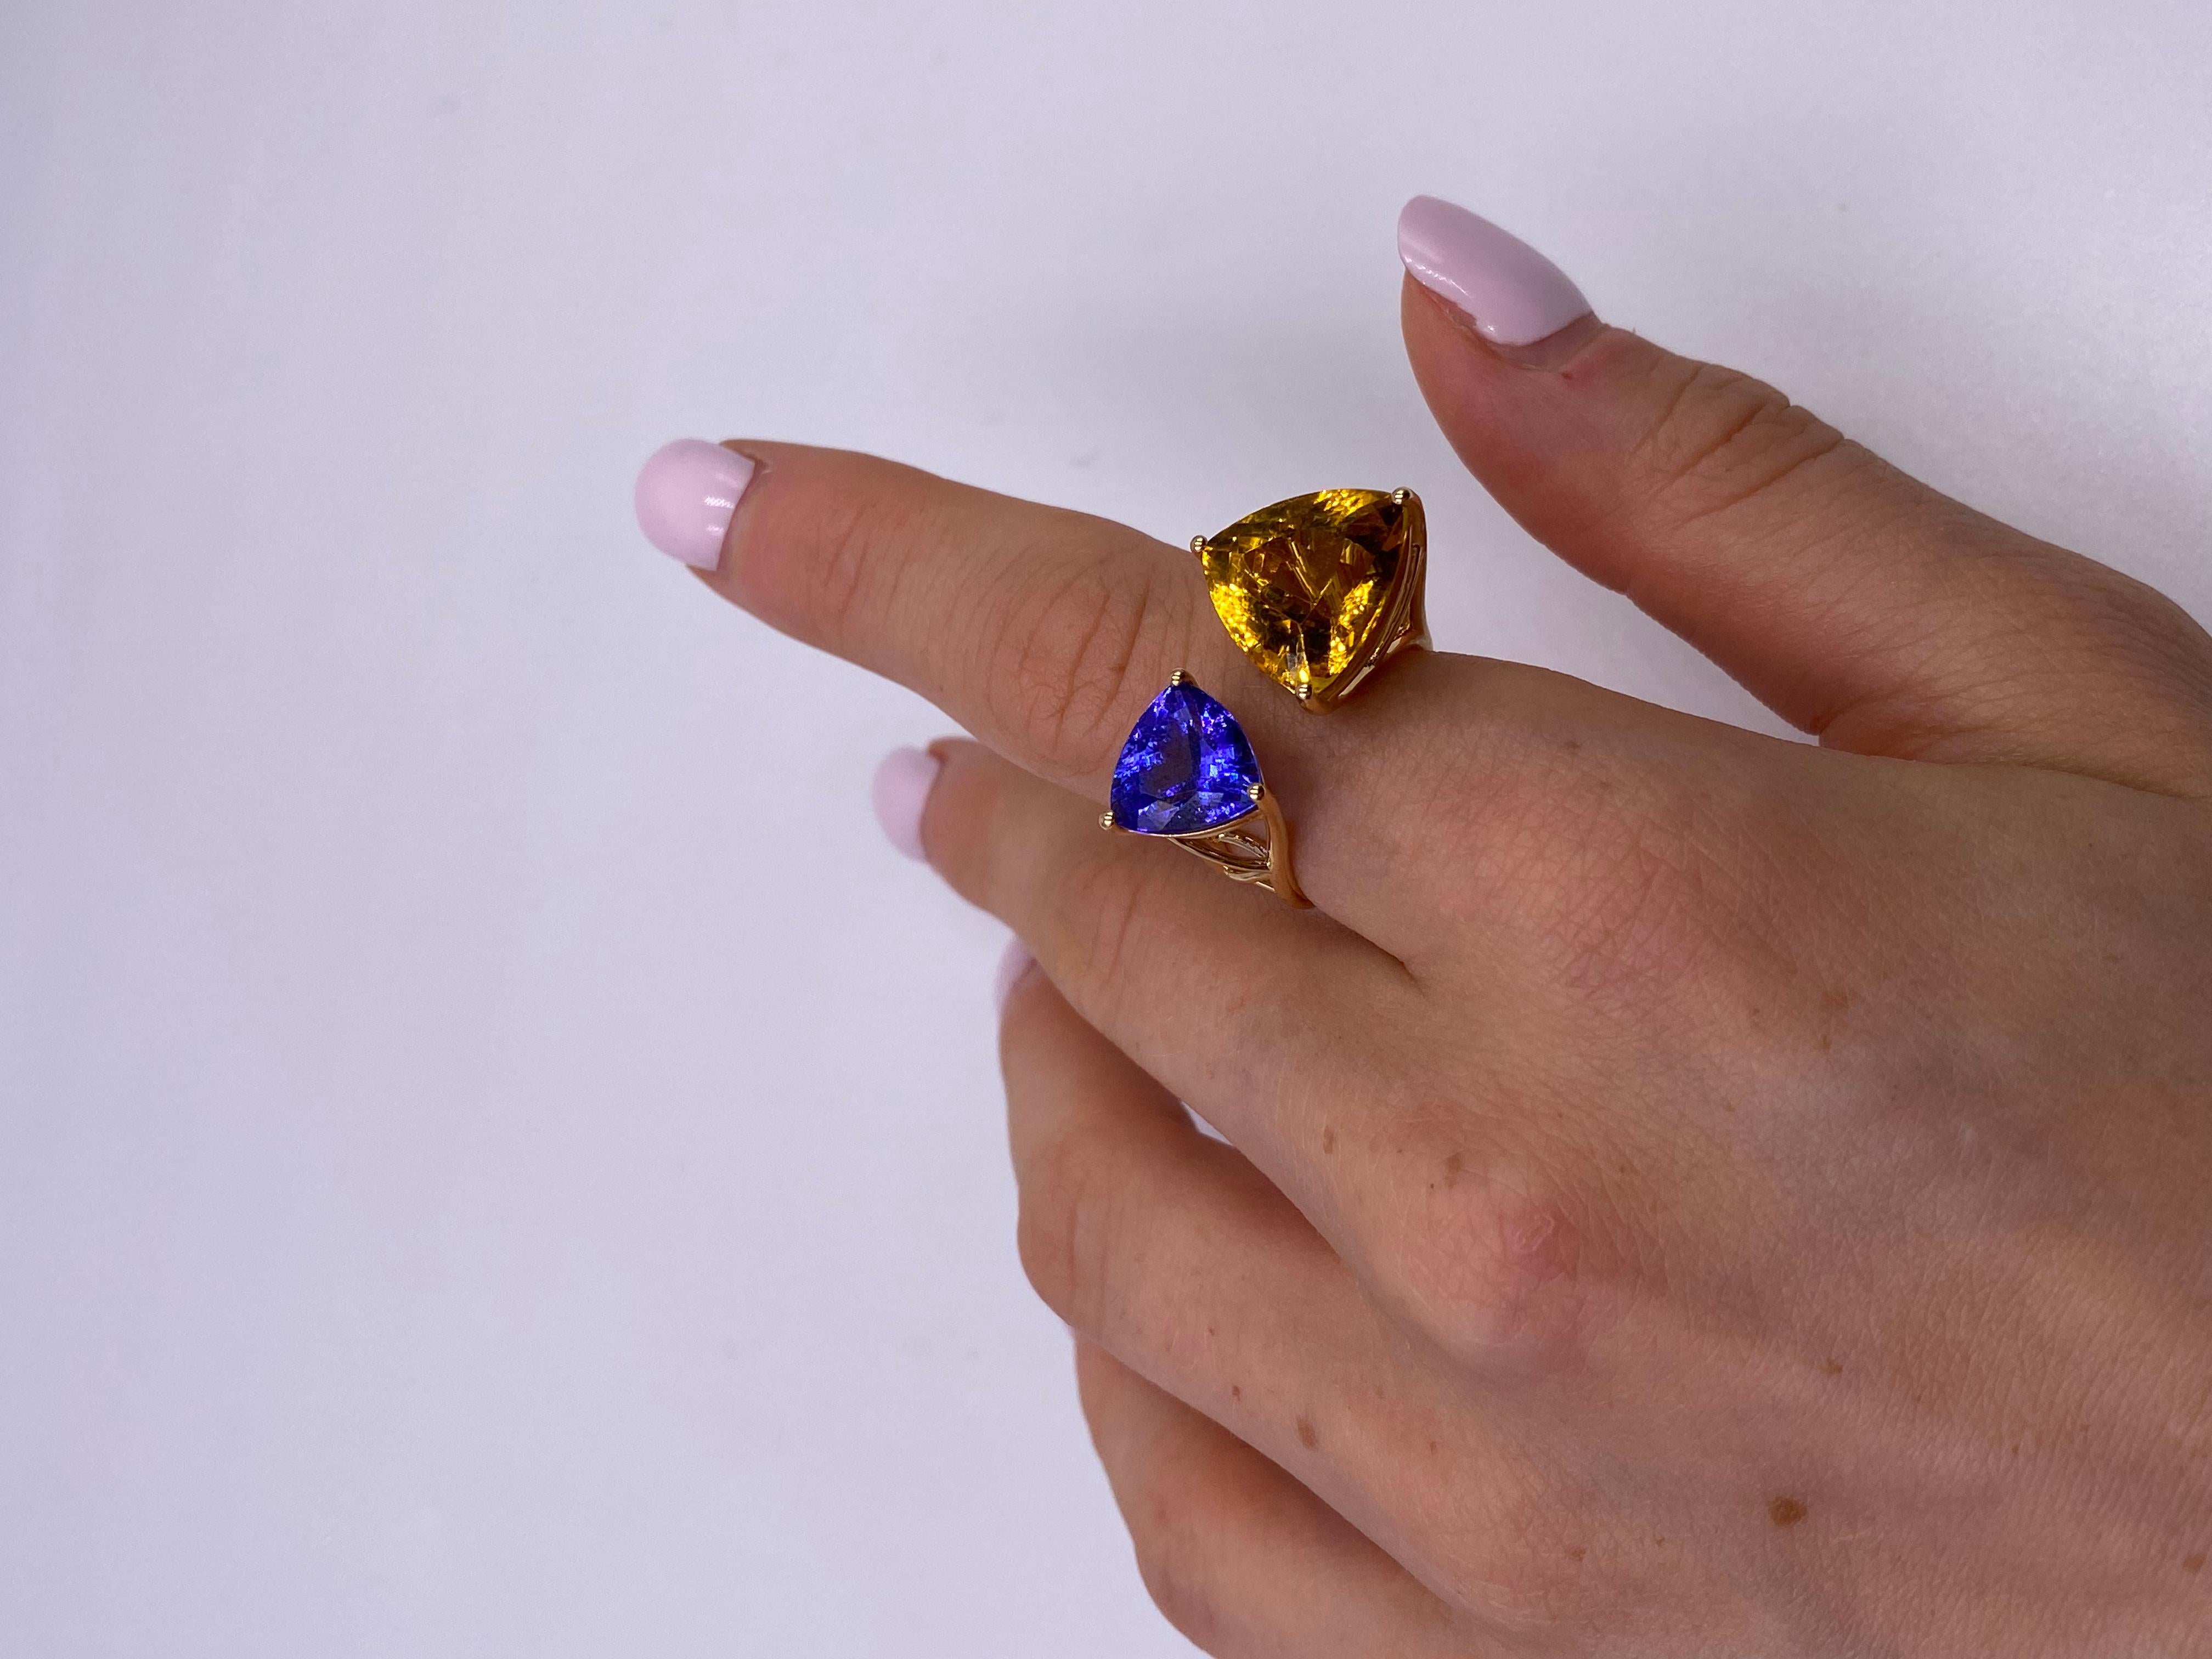 This glamorous ring set with a 7.63 carat Beryl and 3.62 carat Tanzanite framed with 18 Karat gold is the most recognizable model of ALPENGEM. The special design of the ring showcases the philosophy of the brand. The company is based in Switzerland 